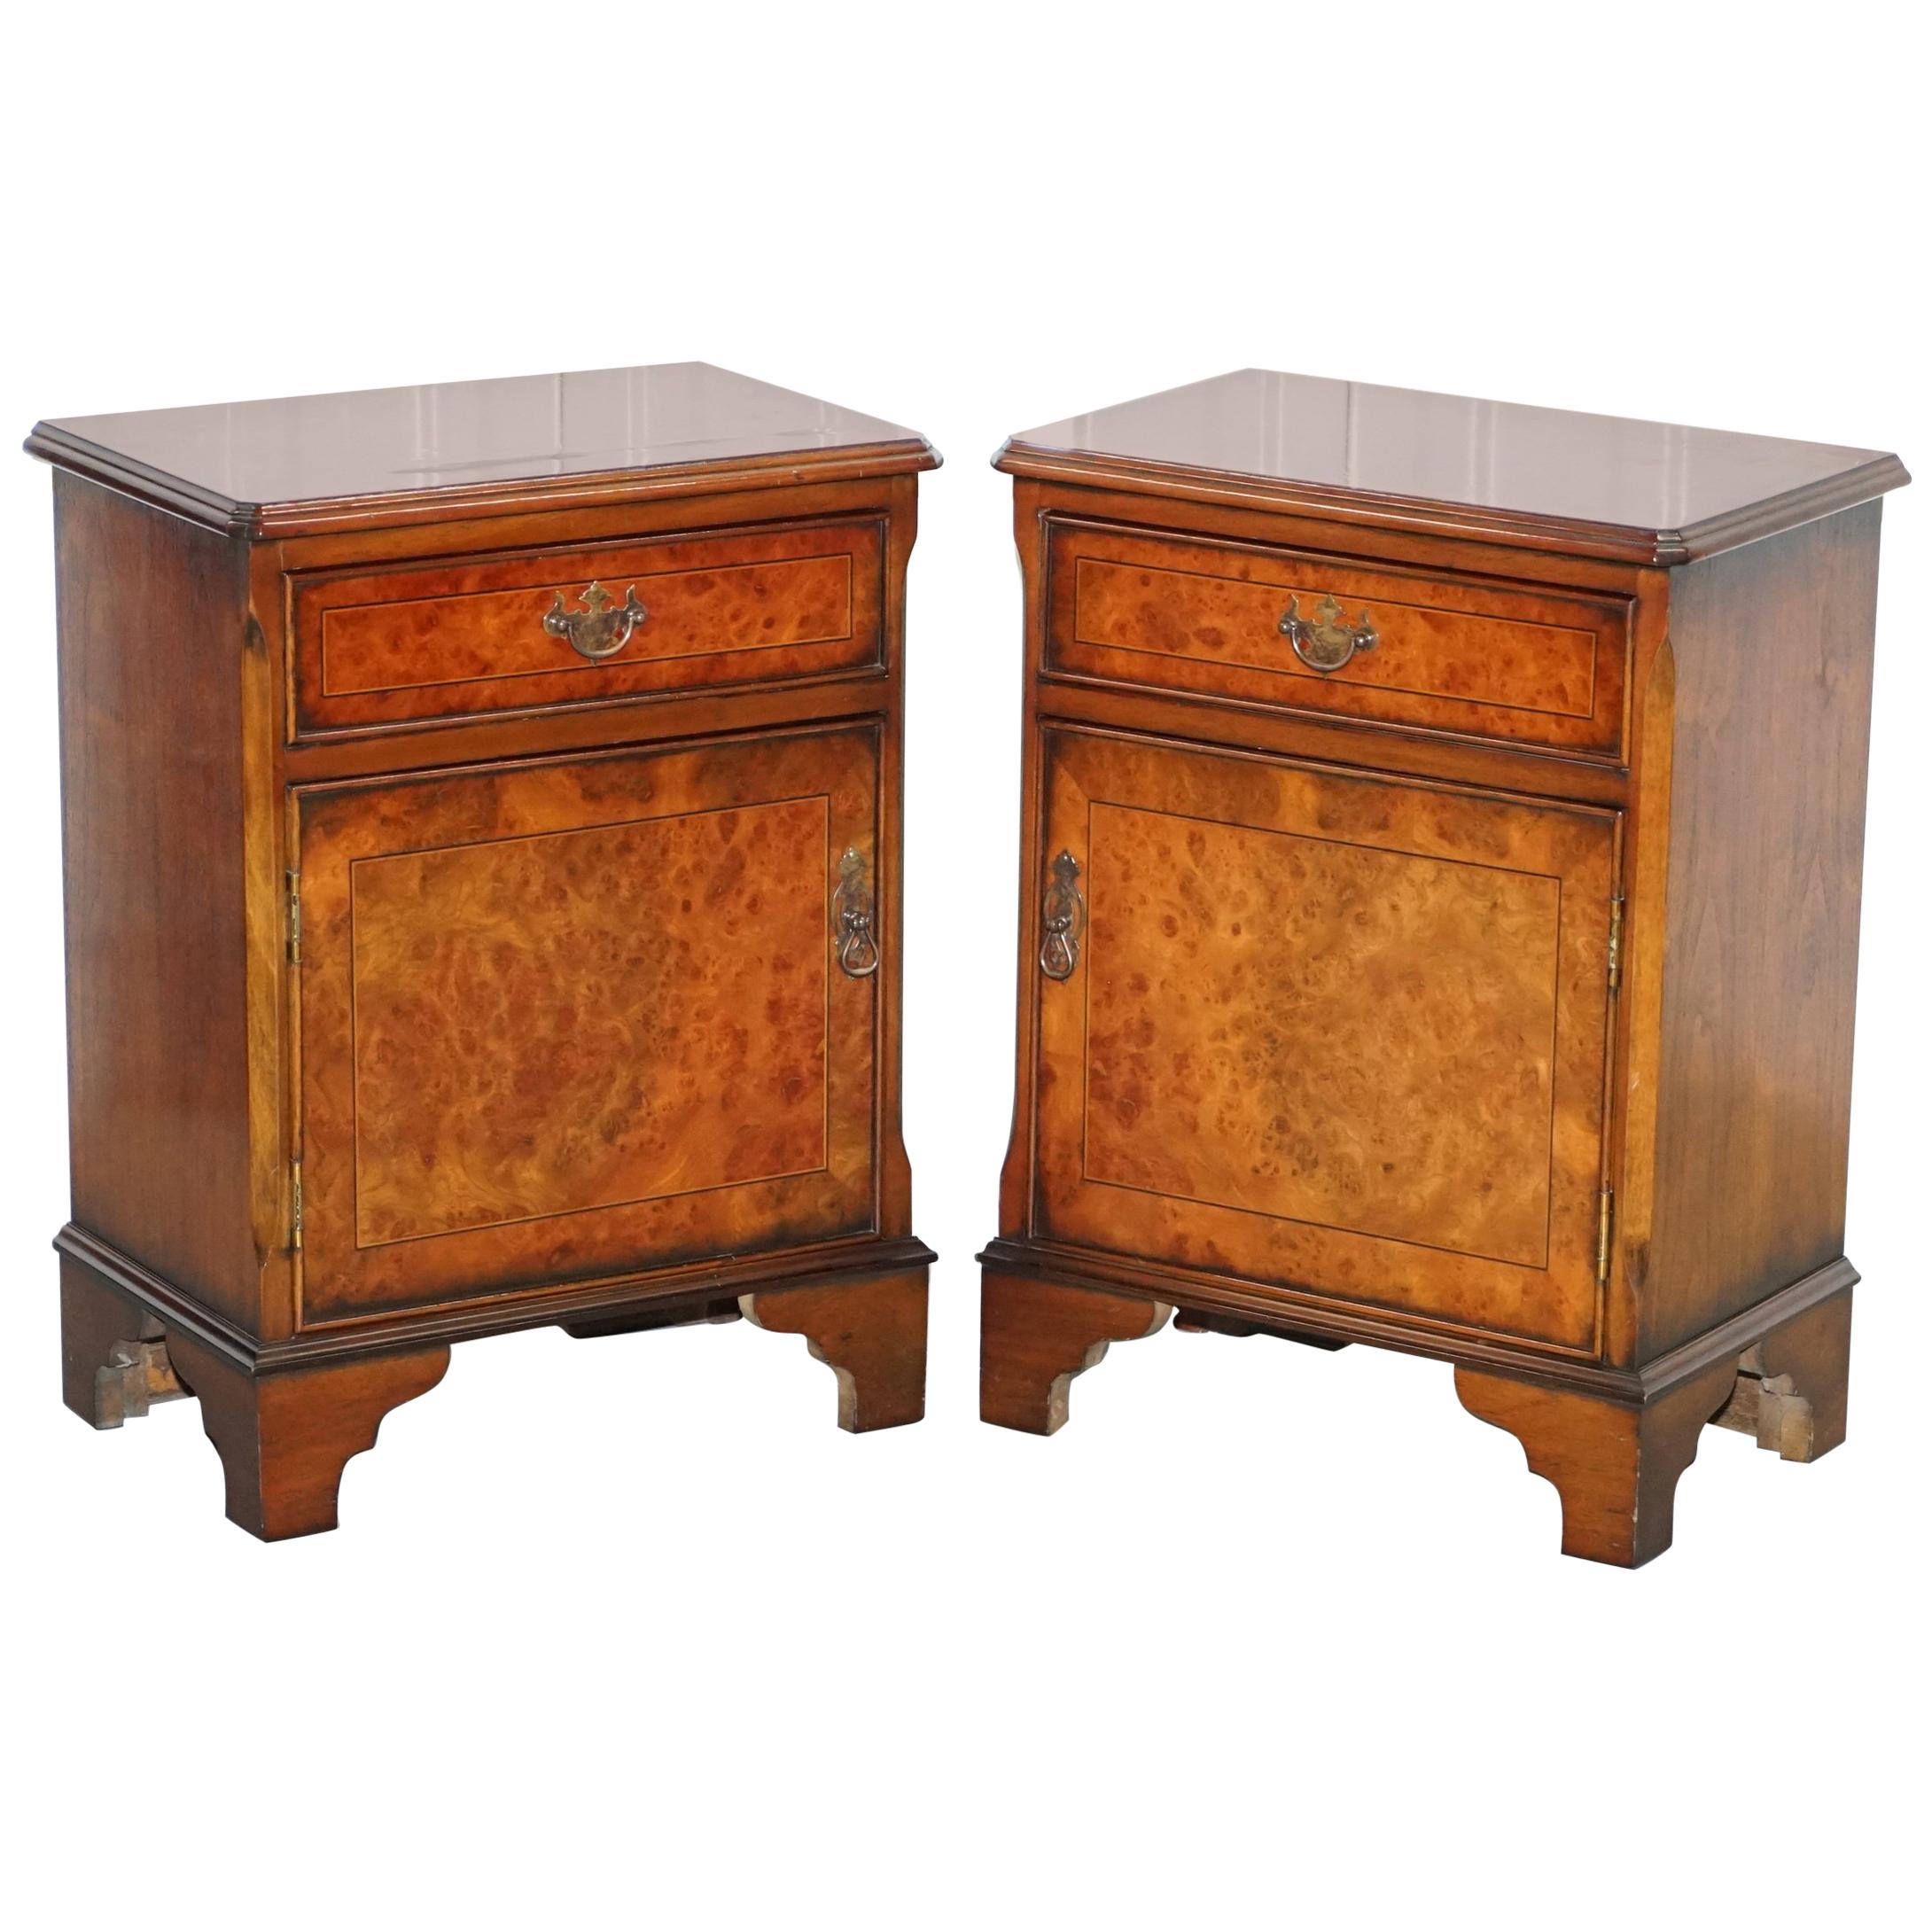 Pair of Vintage Burr Walnut Wood Lamp Side End Wine Table Cupboards with Drawers